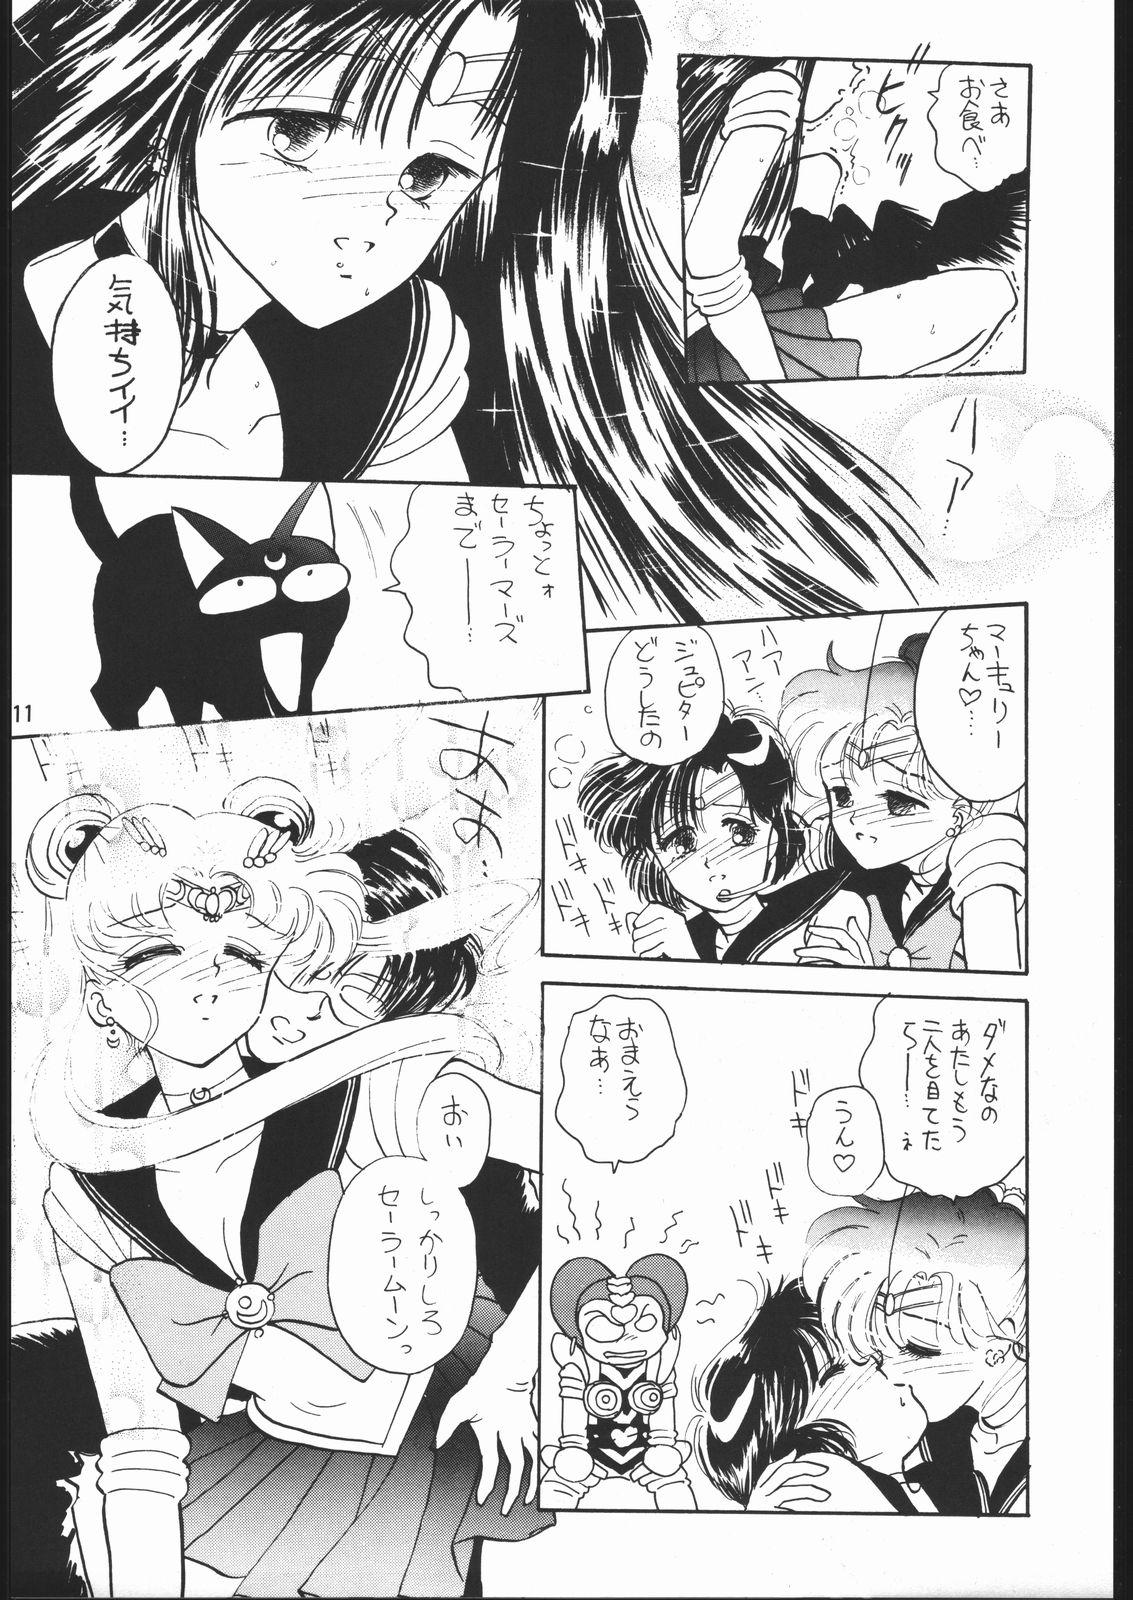 Naked Sex うさぎがピョン!! - Sailor moon Bubble Butt - Page 10